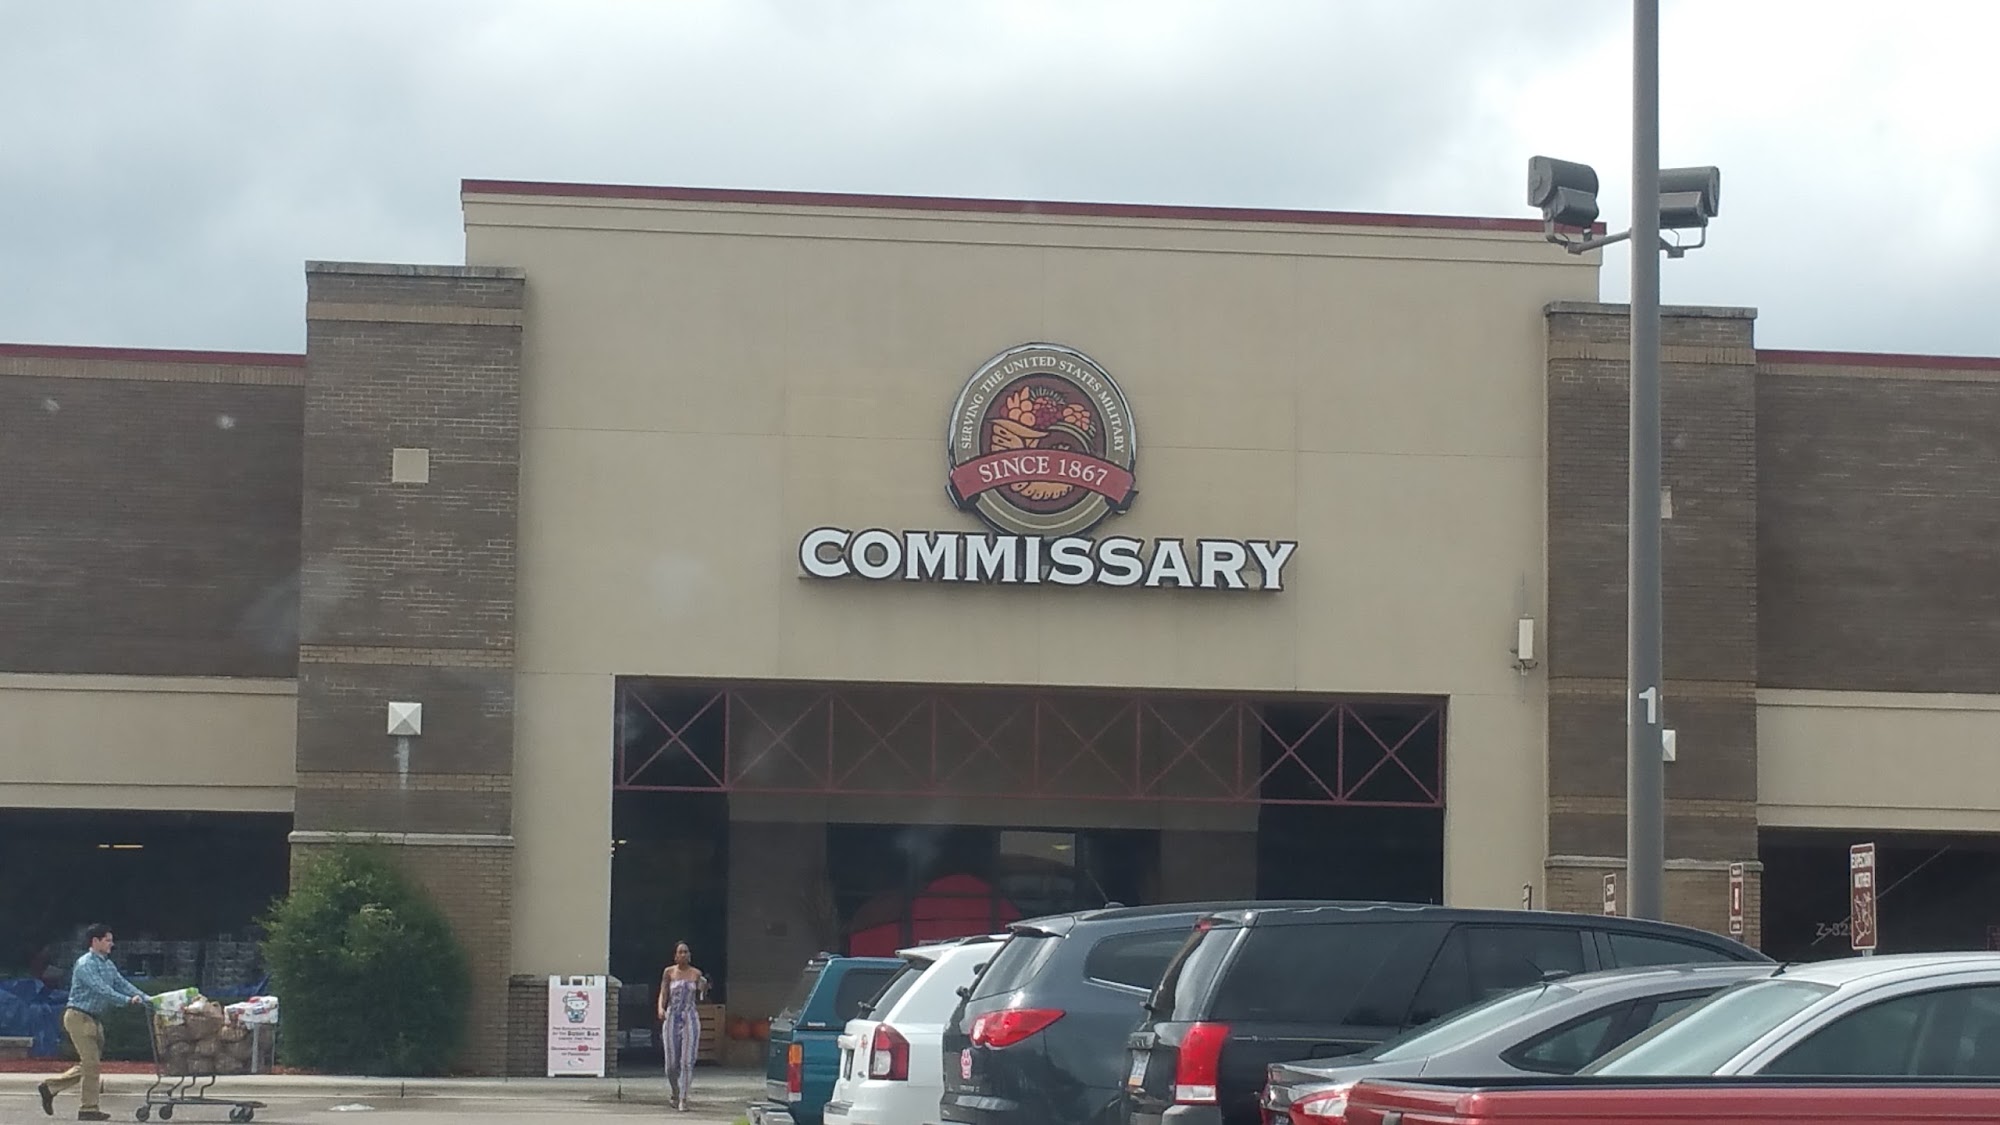 South Post Commissary